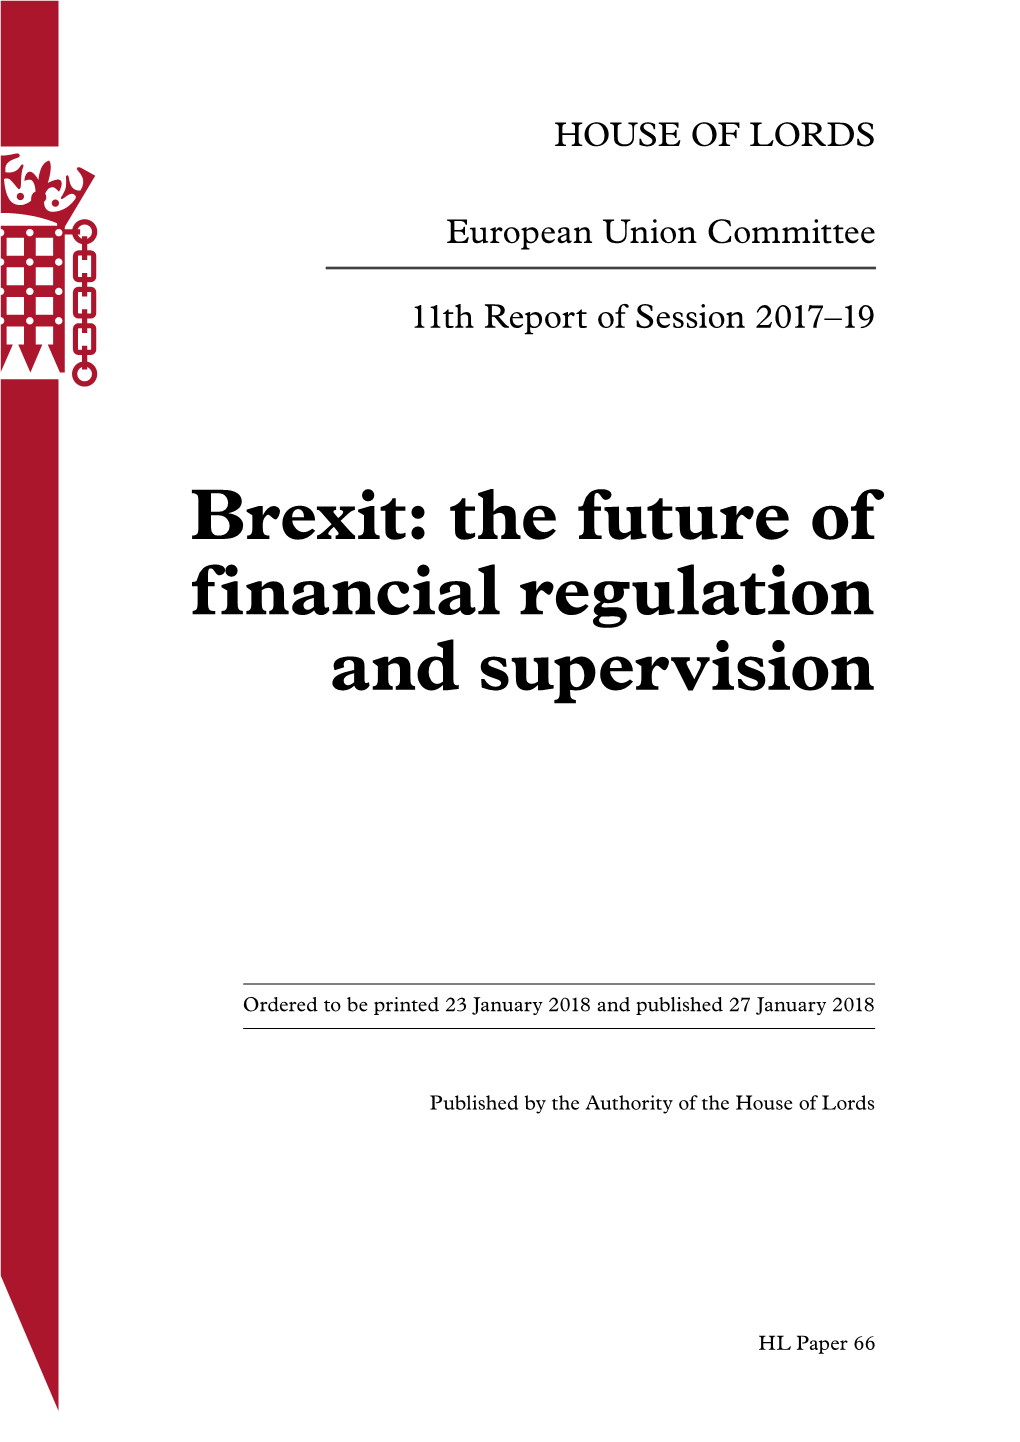 Brexit: the Future of Financial Regulation and Supervision